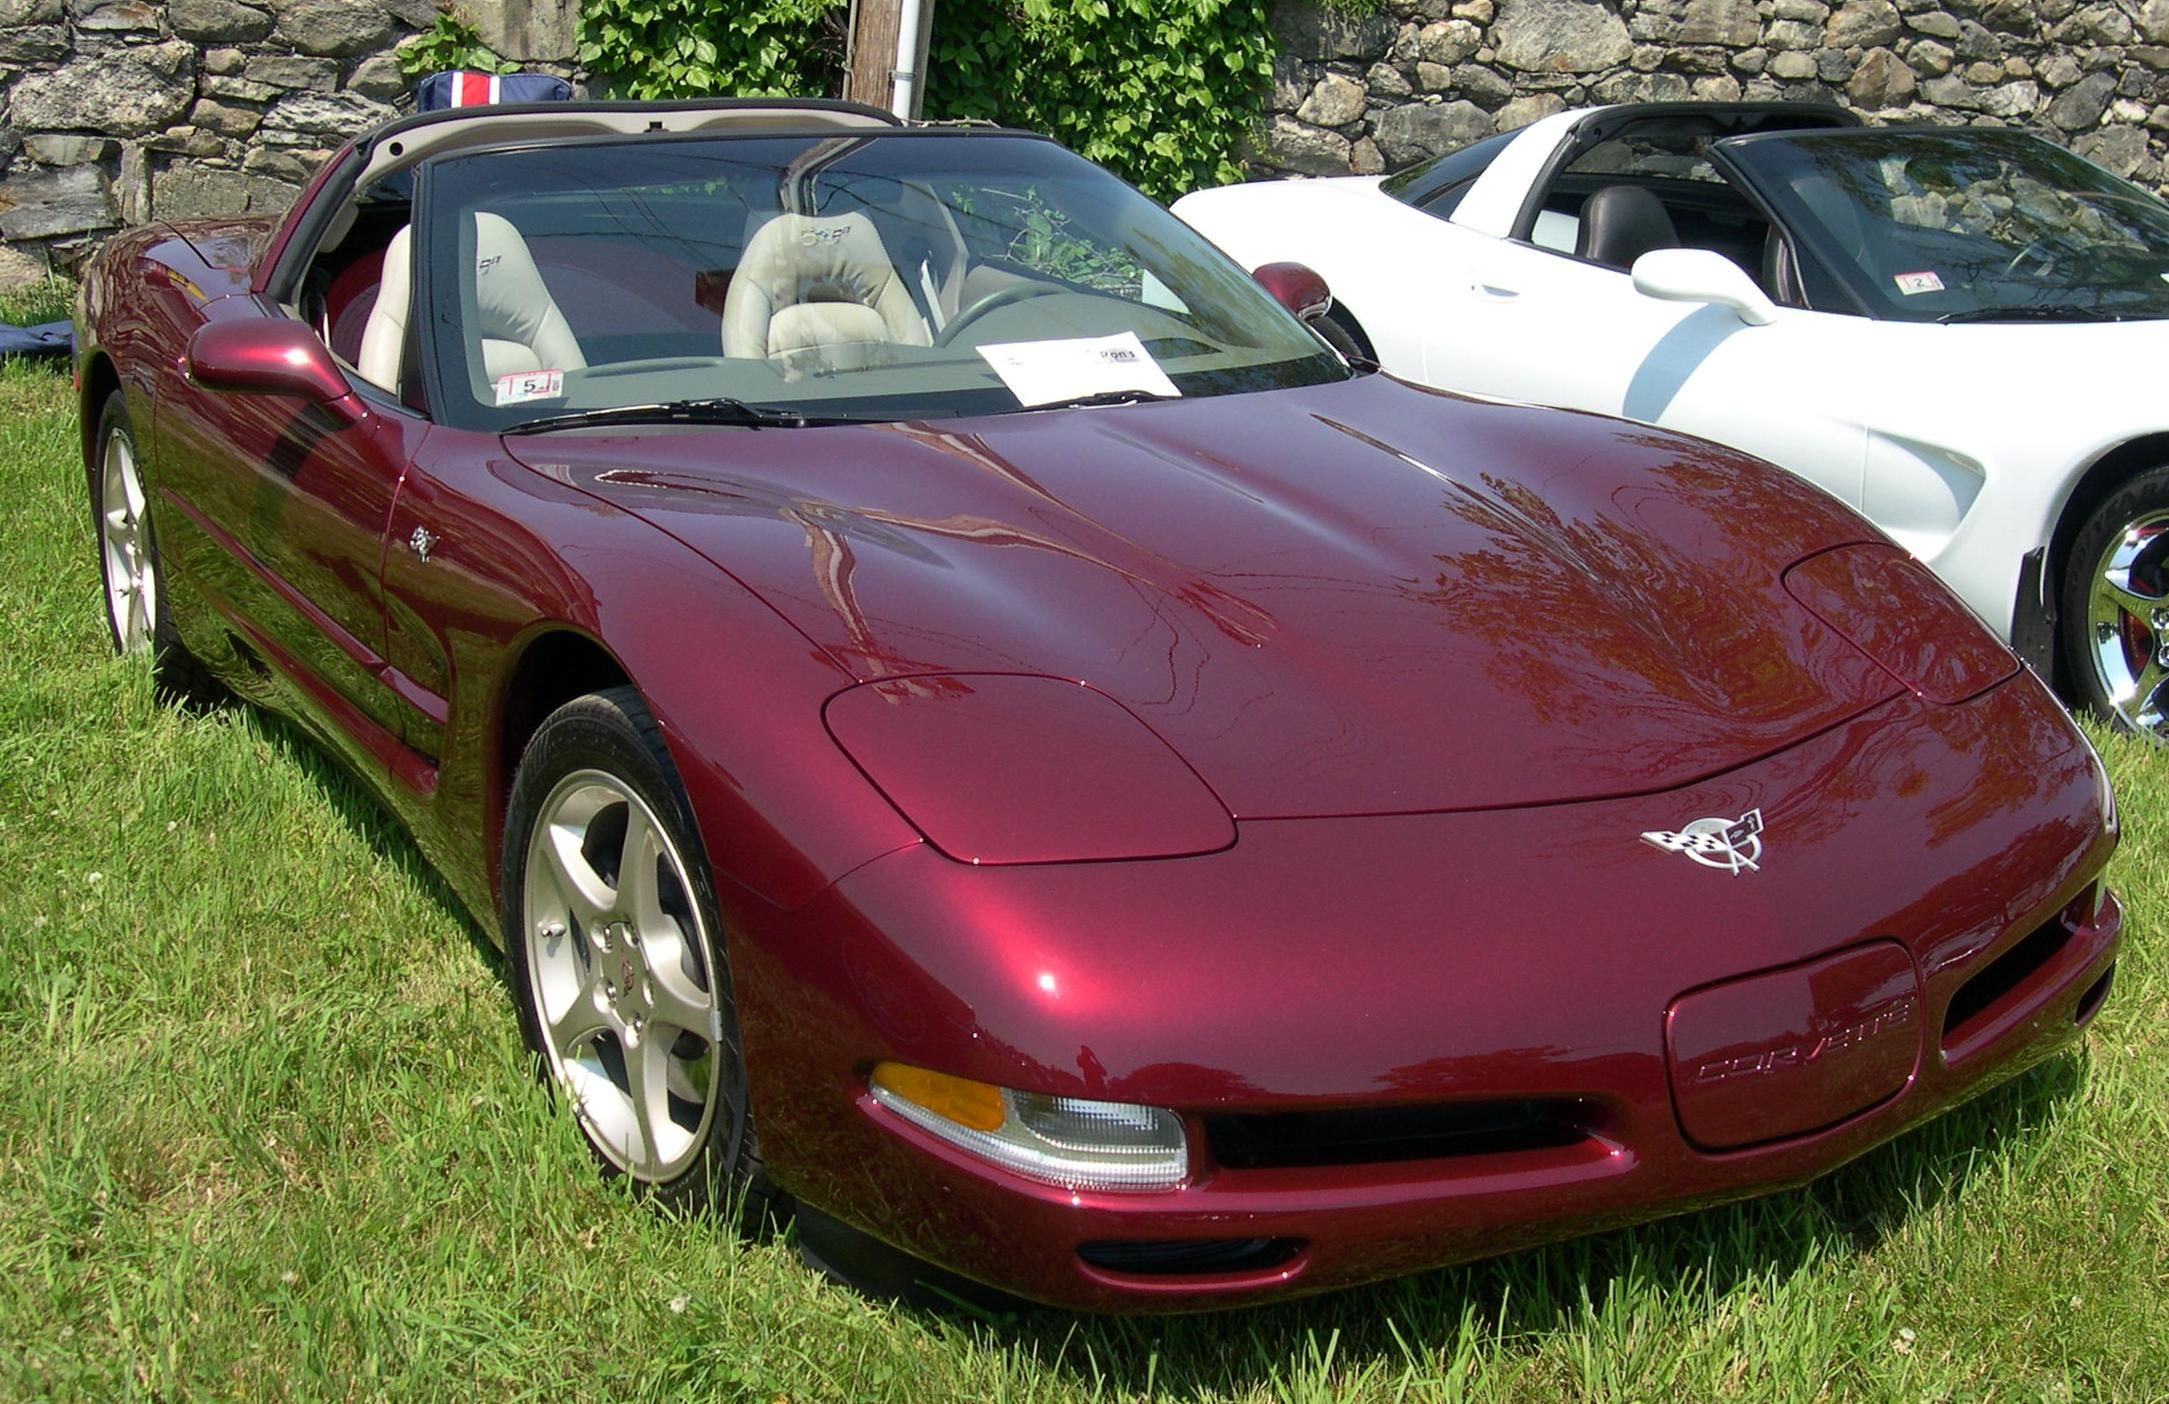 2004 Chevy Corvette with pop-up headlights